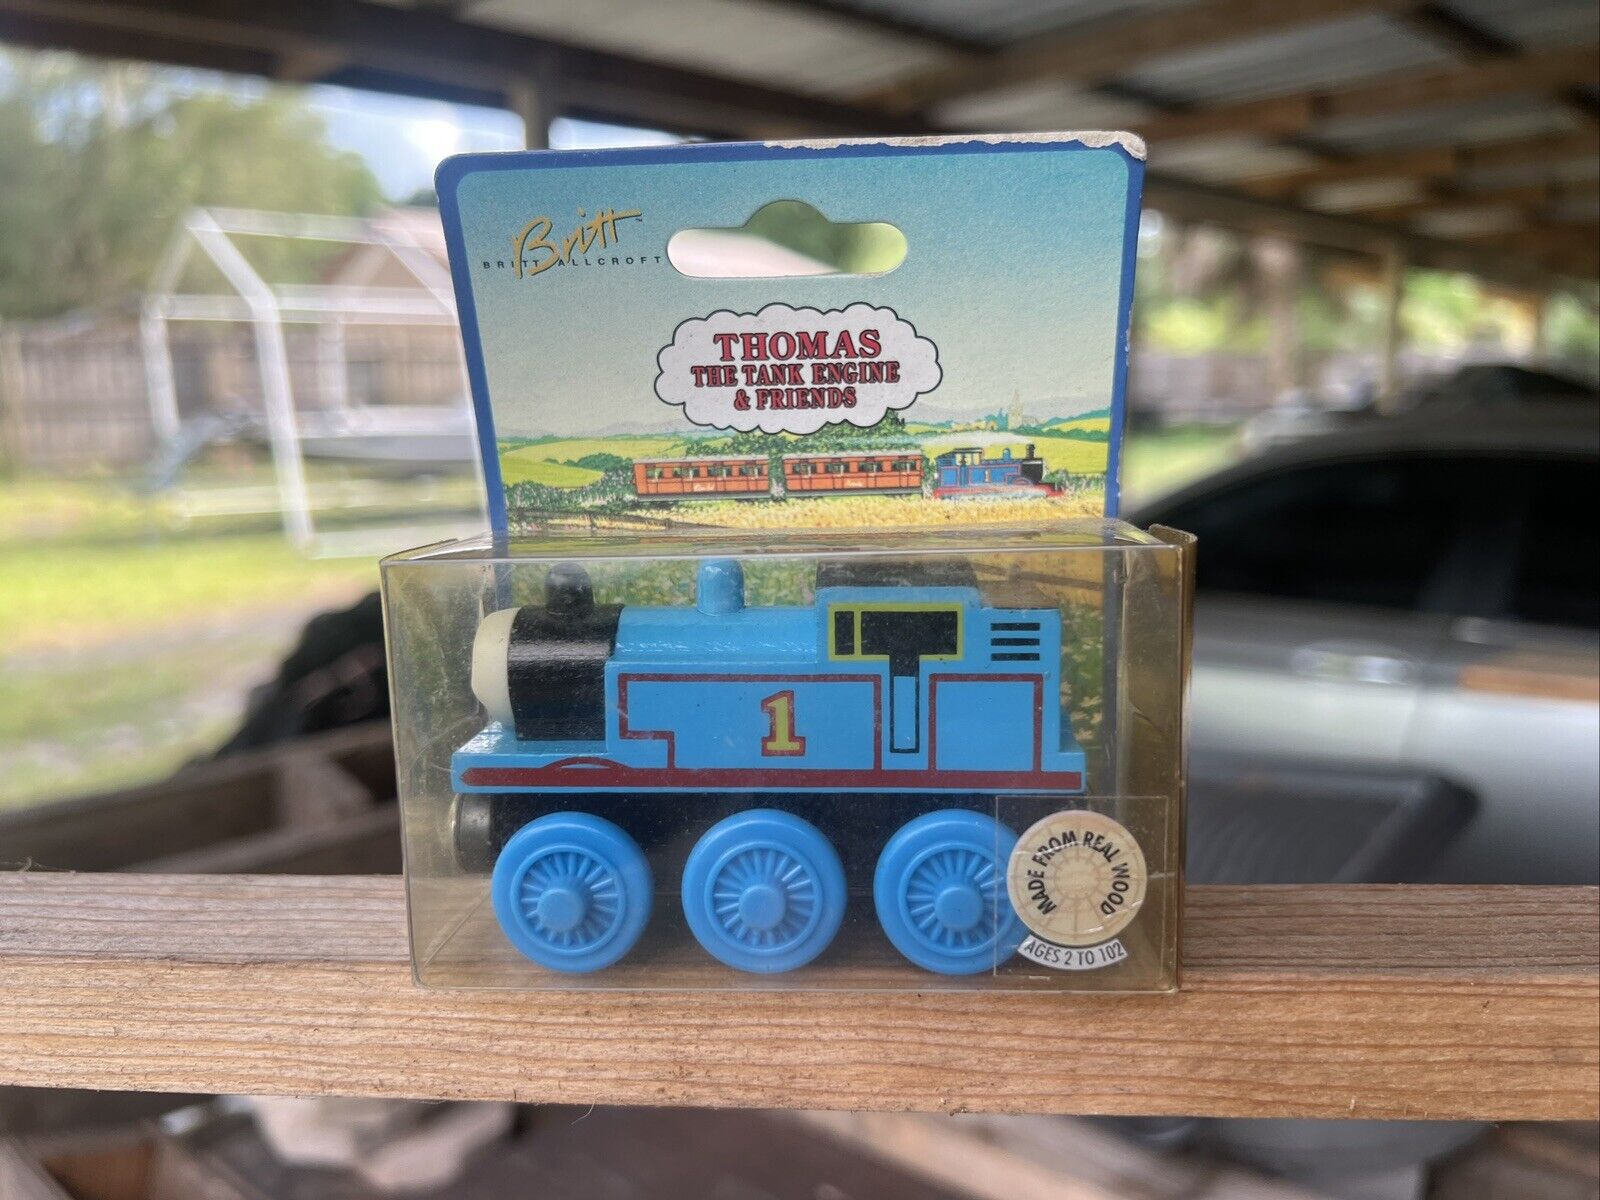 LEARNING CURVE TOYS - THOMAS THE TANK ENGINE AND FRIENDS - THOMAS  1997